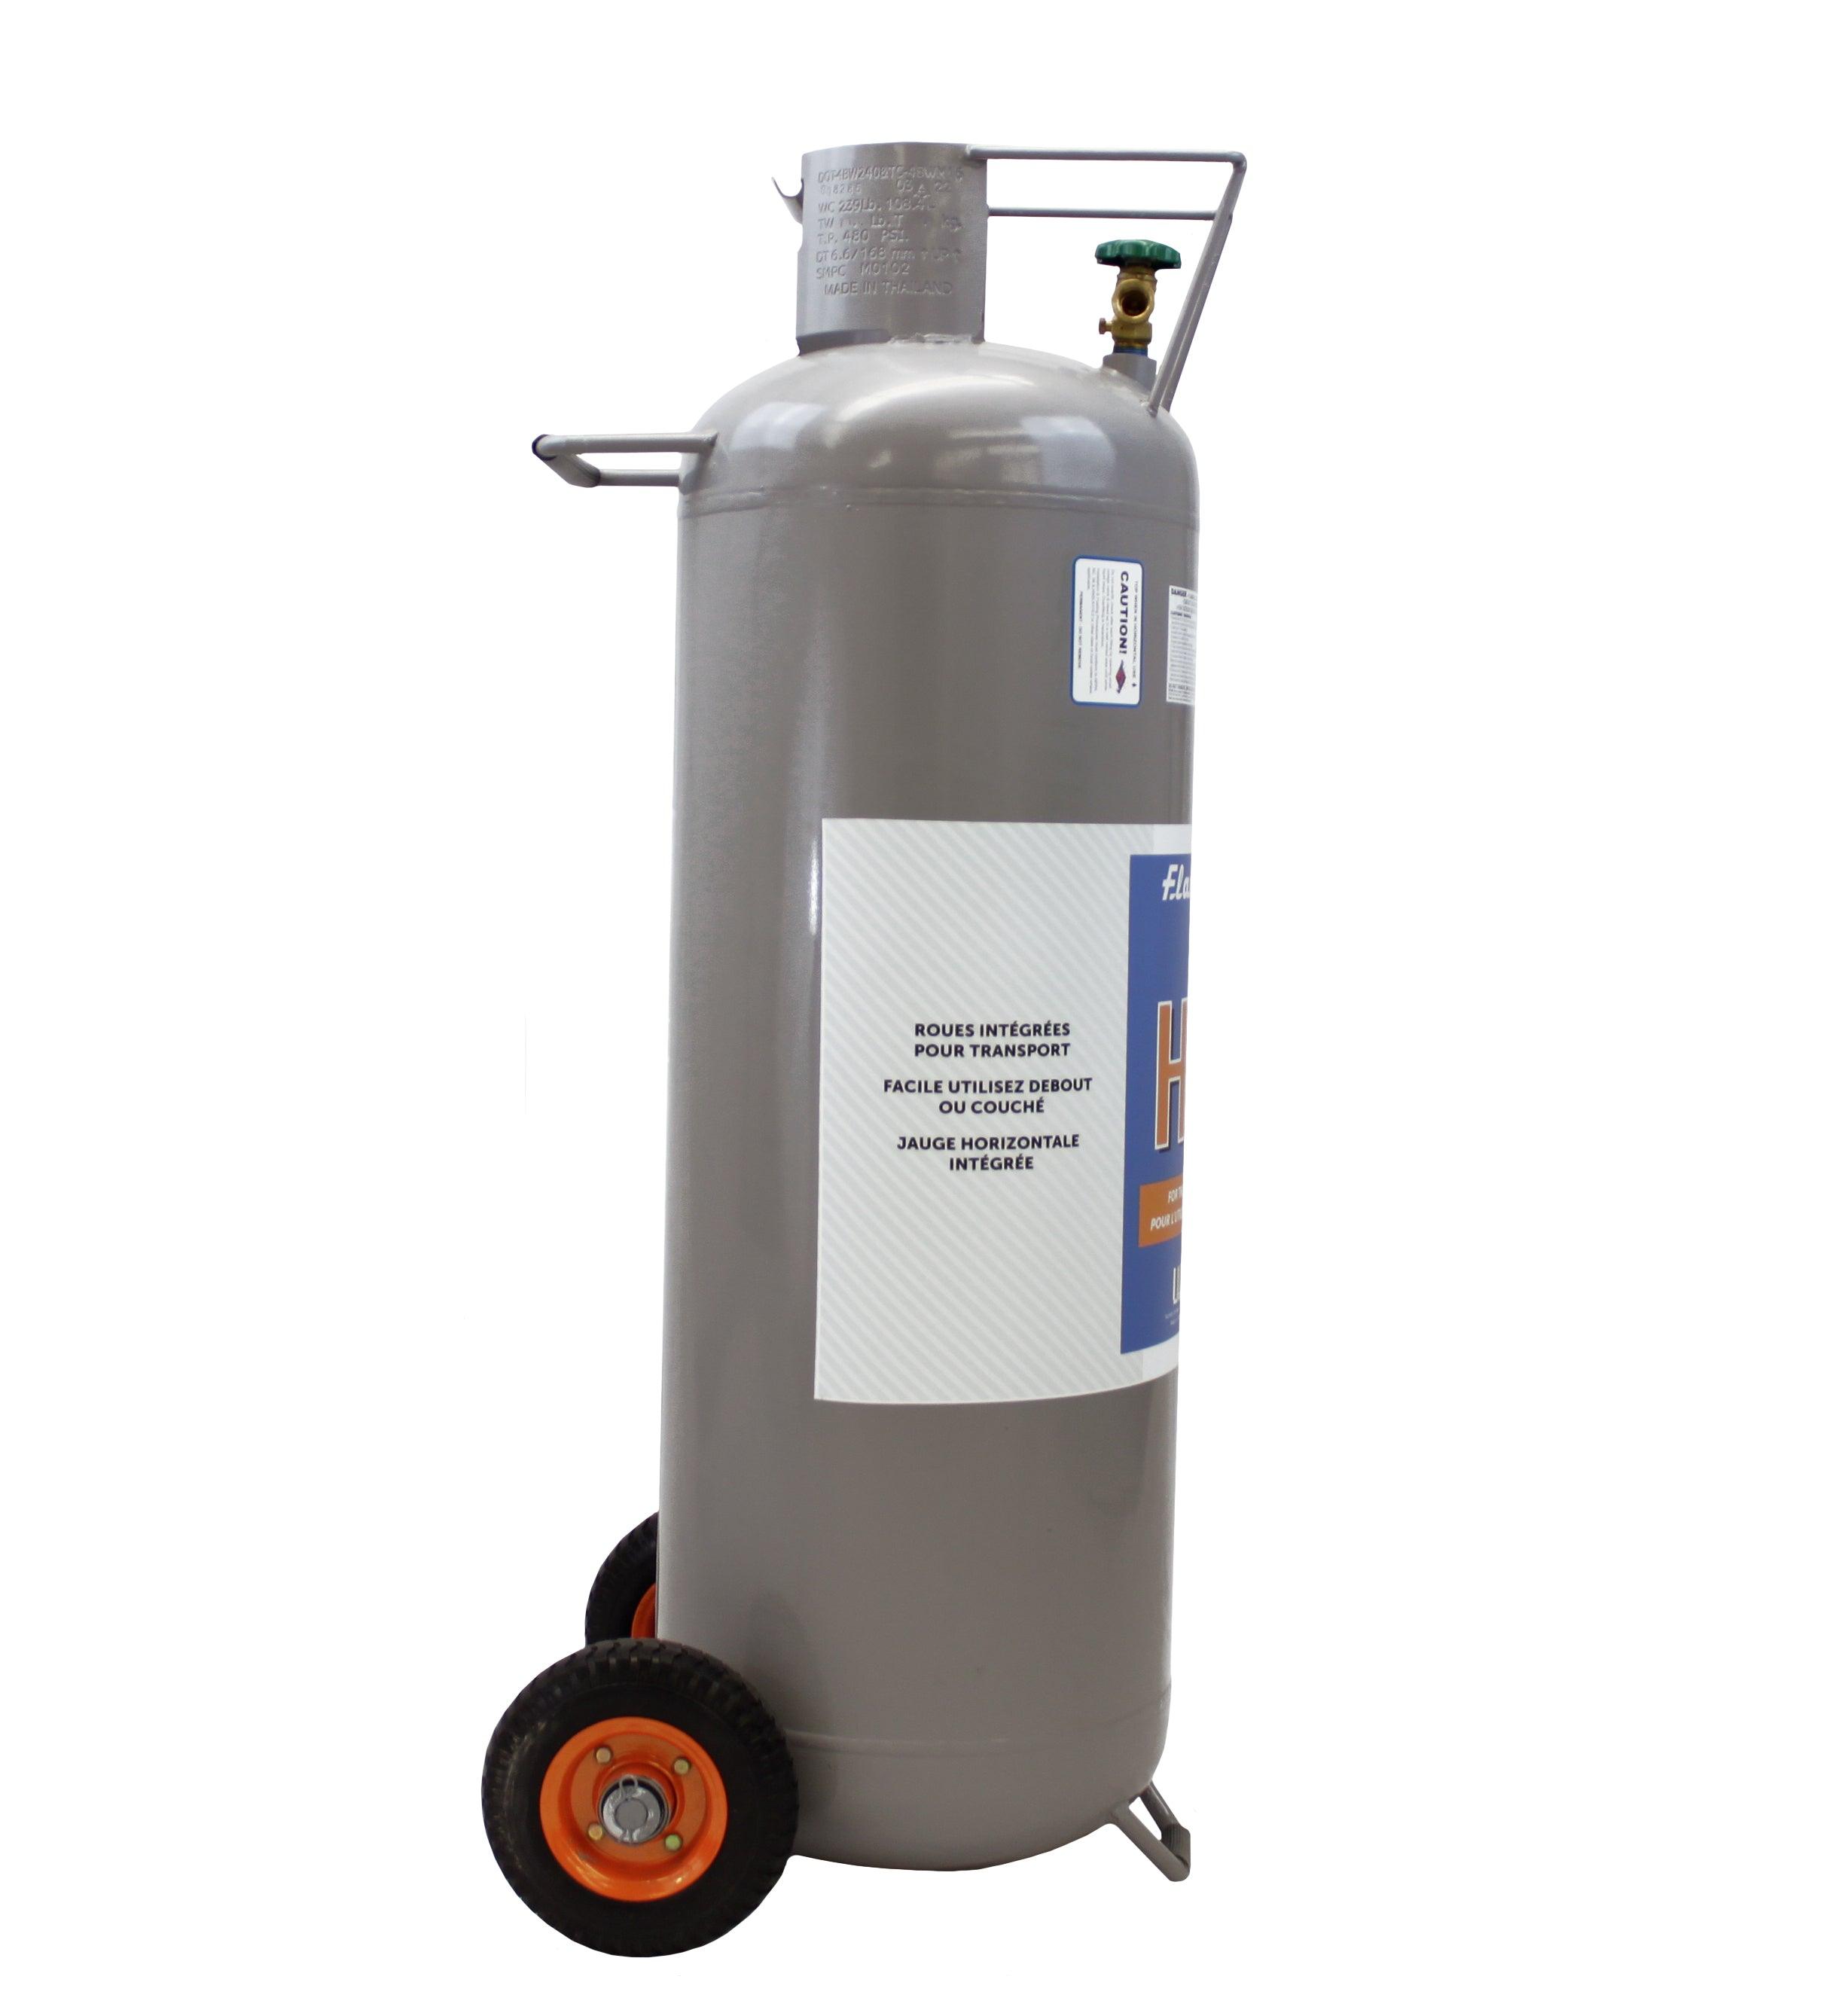 Flame King 100lb Horizontal & Vertical Propane Cylinder with POL & Wheels - Flame King